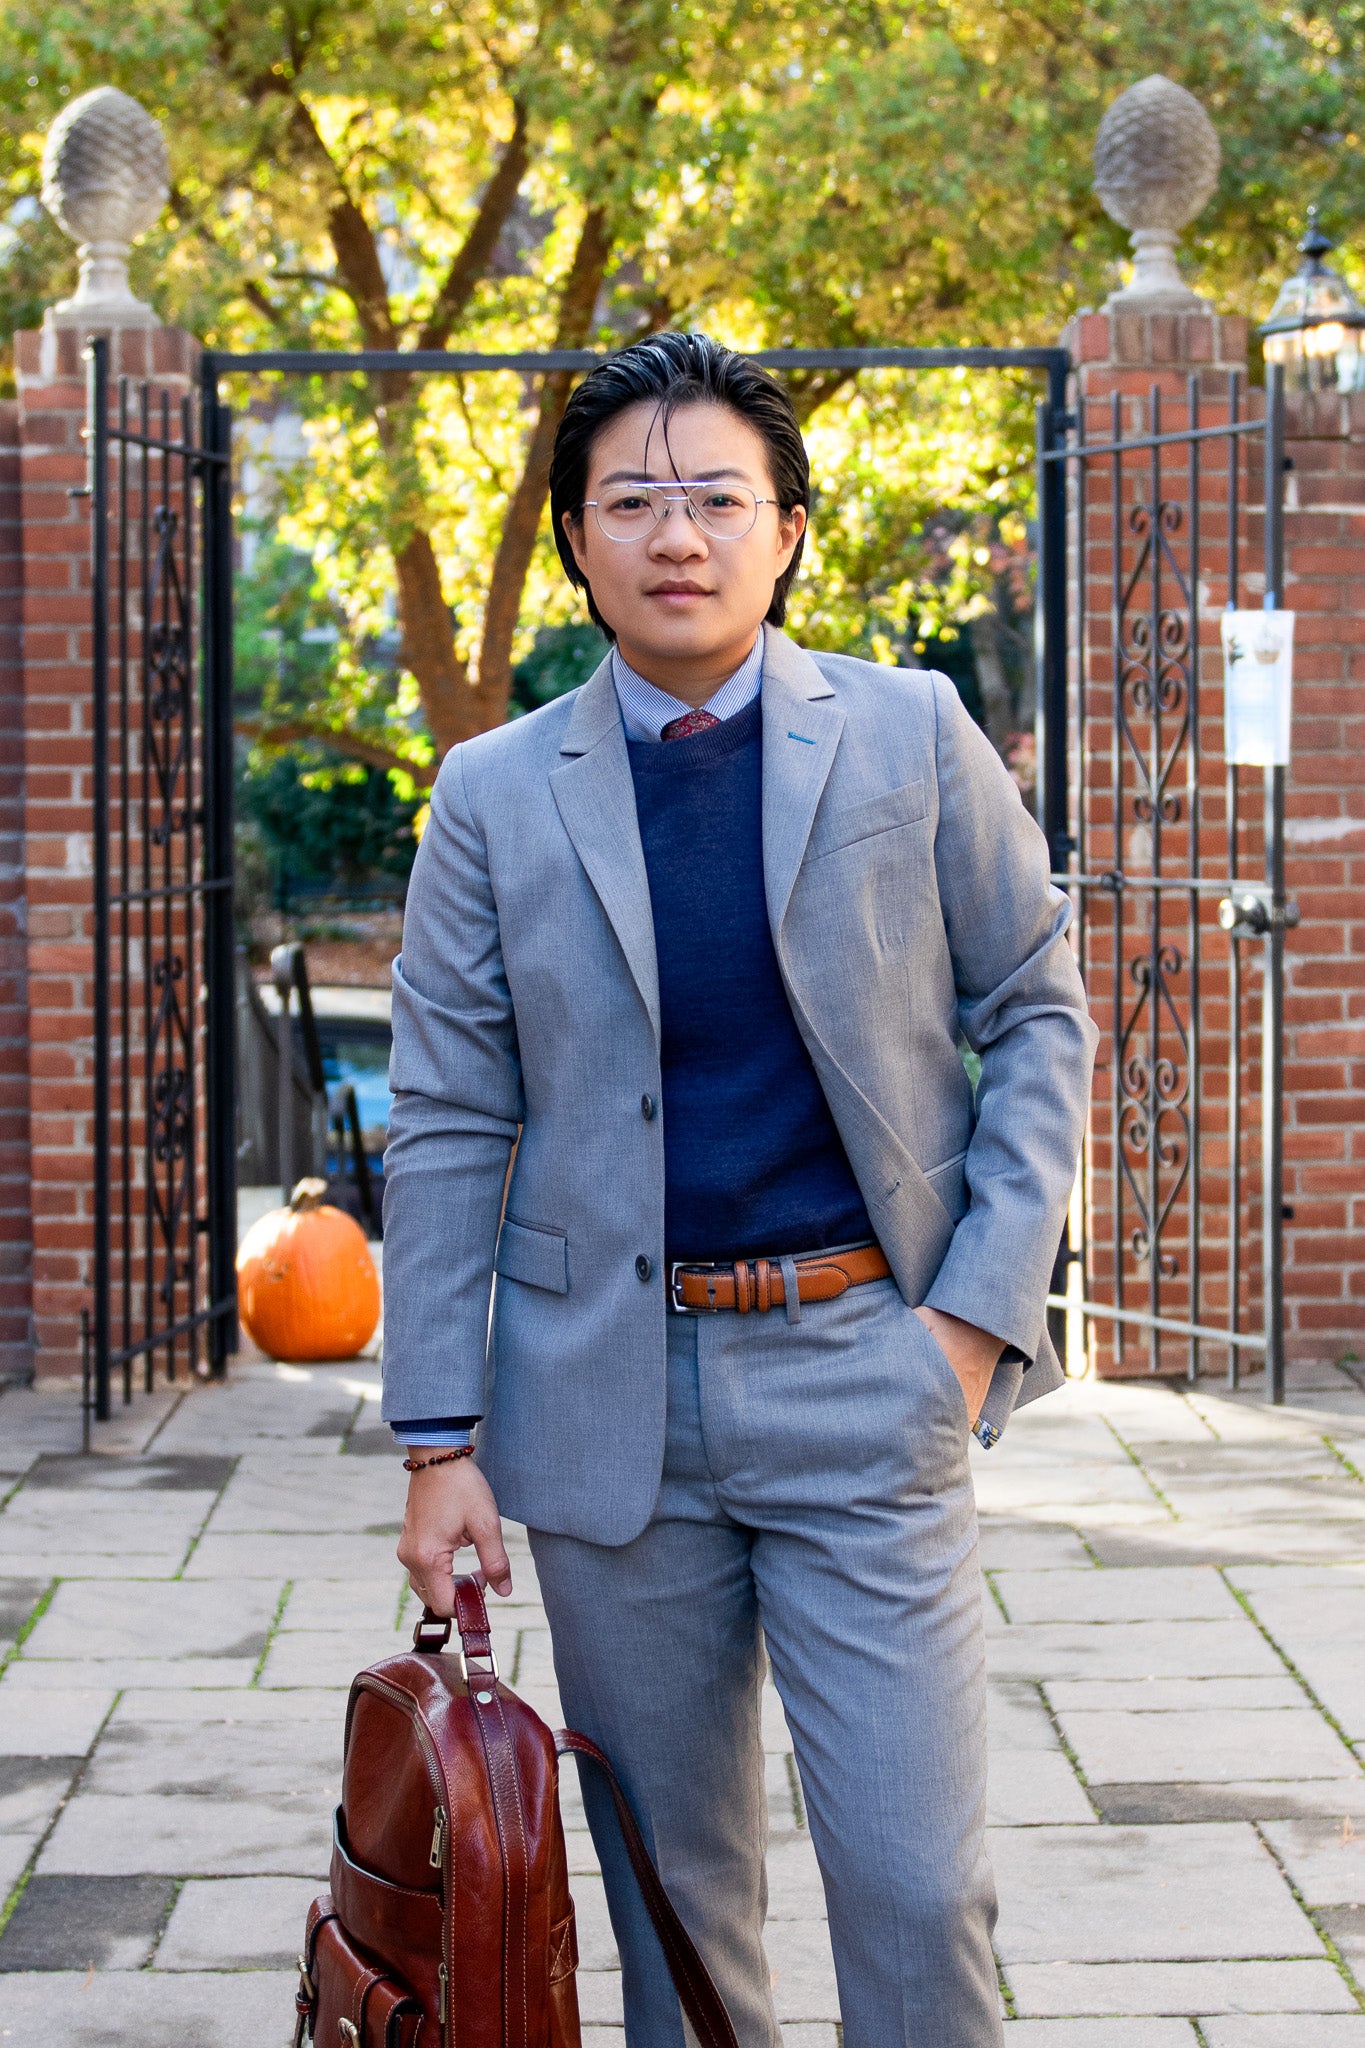 Airin Yung, transmasculine lawyer stands outside in their courtyard in a Kirrin Finch Gray Georgie Suit, Navy Crew Sweater, holding a bag in their left hand. Their hair is slicked back and they dawn a pair of glasses